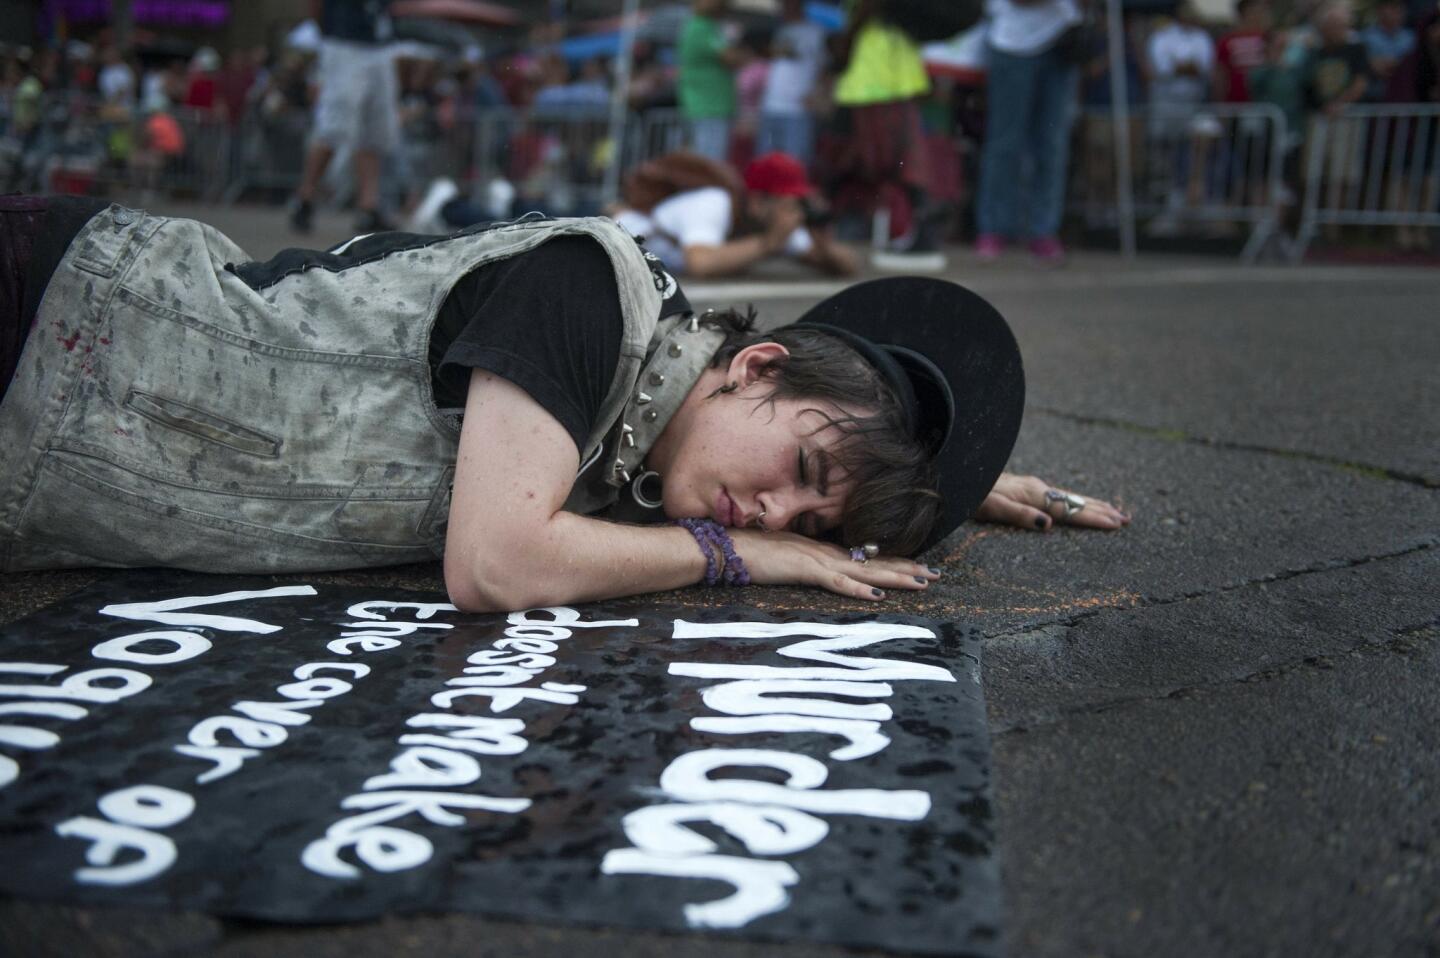 A protester wanting only to be identified as Johnny participates in a die-in to raise awareness for transgender rights at the San Diego Pride Parade.